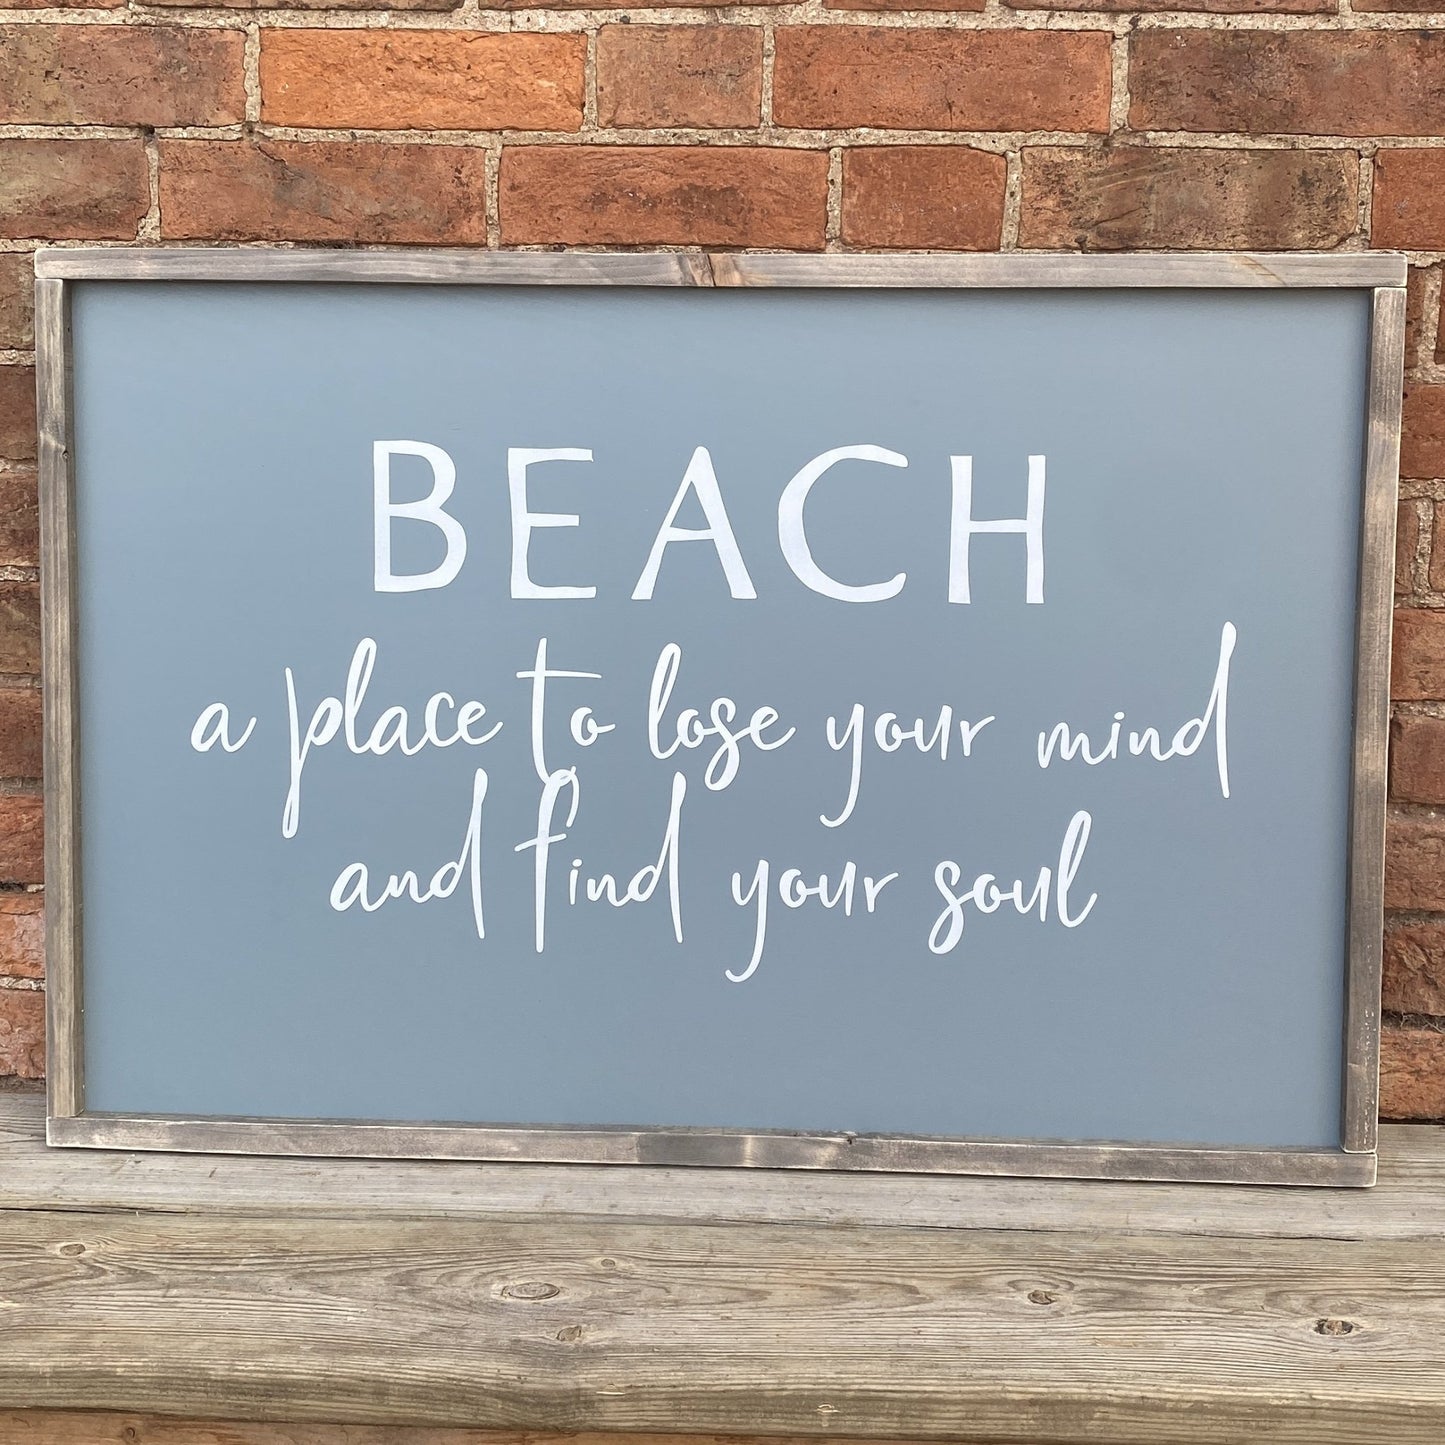 Beach | Framed Wood Sign - The Imperfect Wood Company - Framed Wood Sign